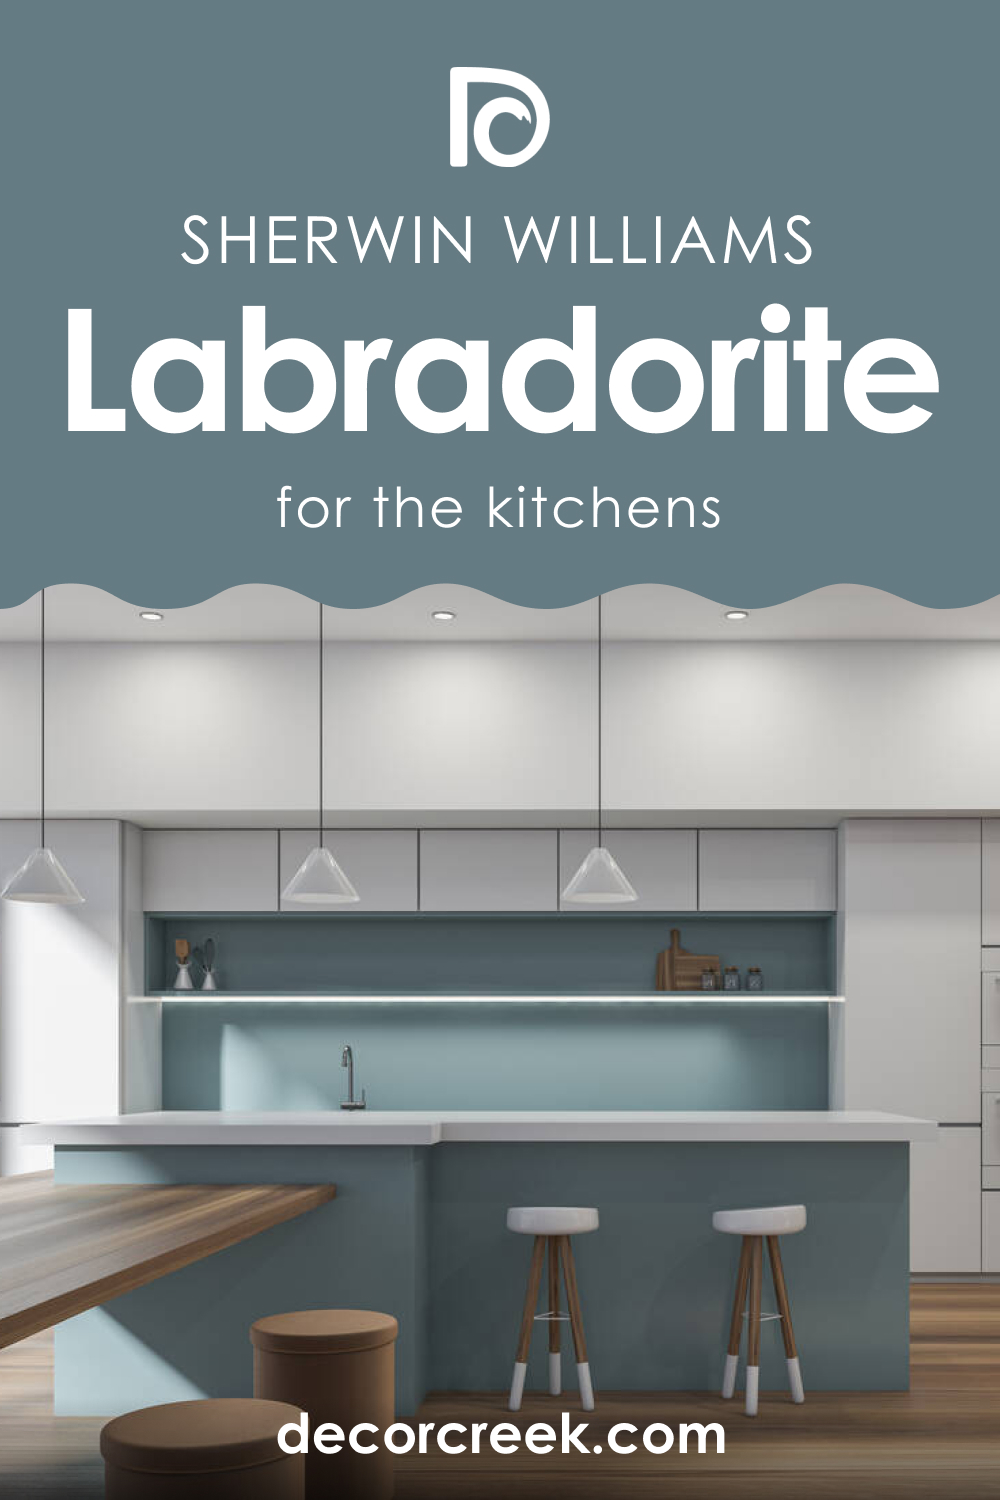 How to Use SW 7619 Labradorite for the Kitchen